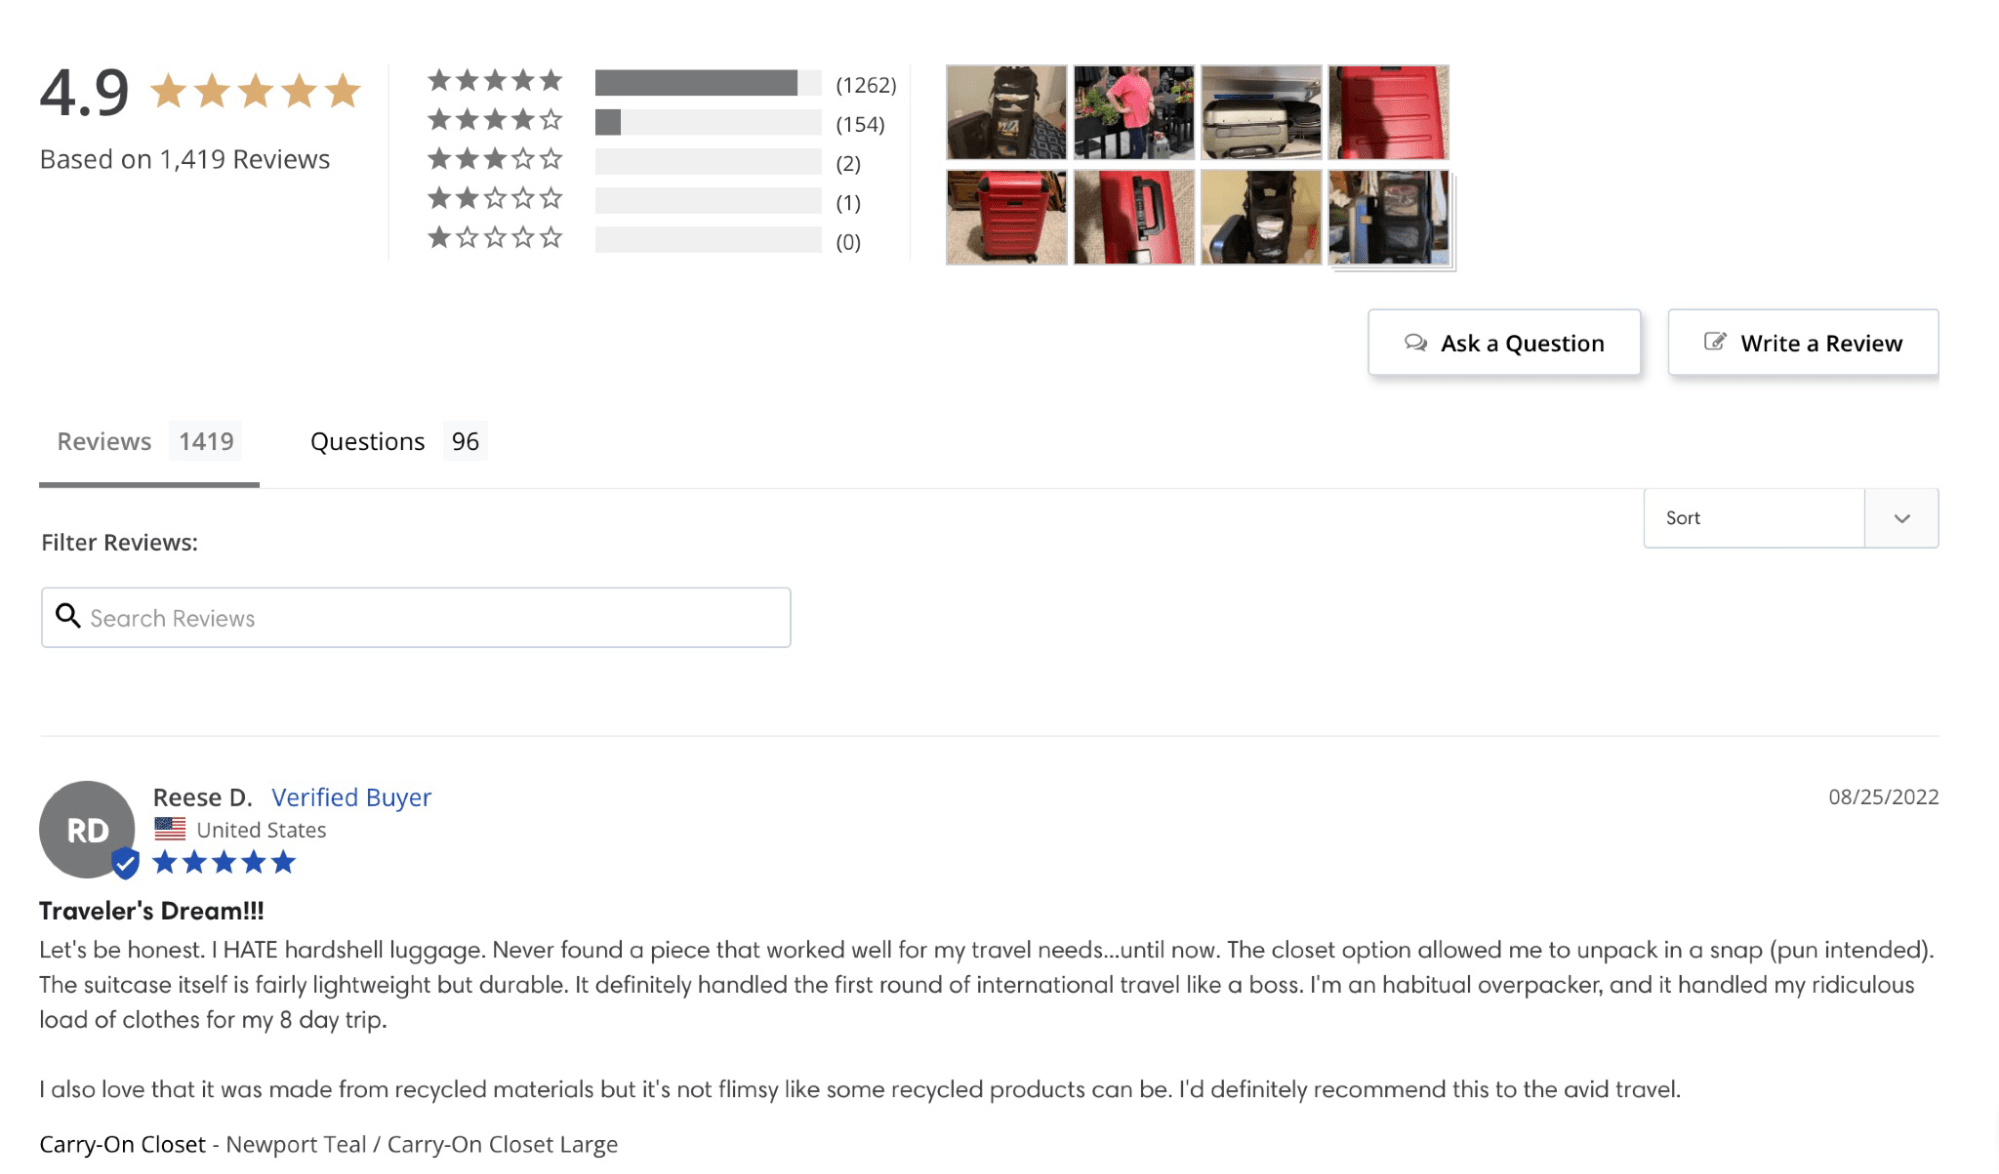 A screenshot of Solgaard's reviews carousel that showcases its 4.9 star rating with 1,419 reviews